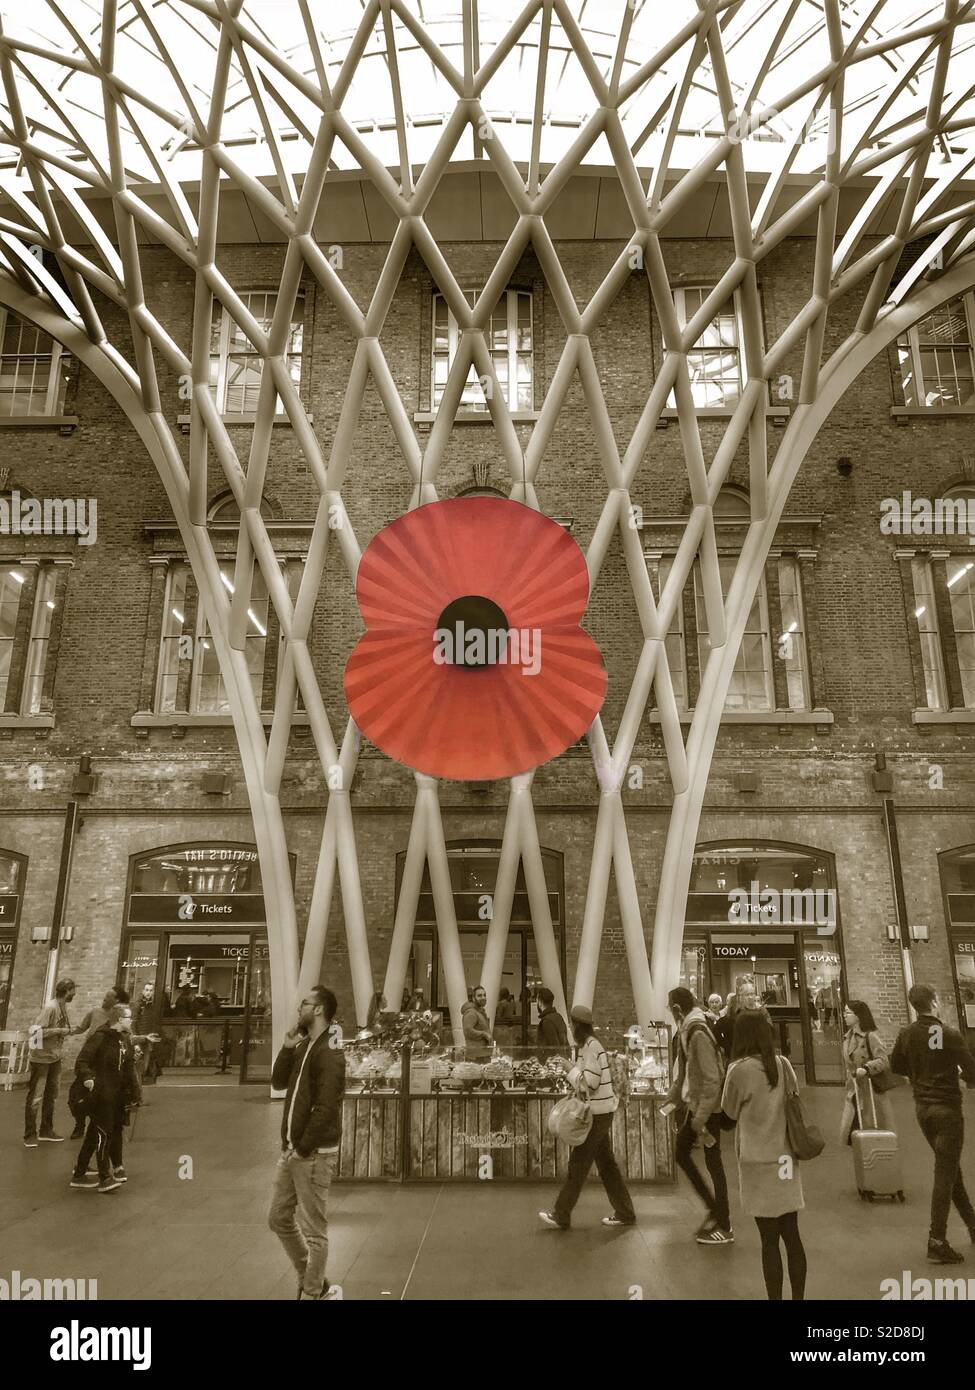 Giant red poppy memorial installation for Remembrance Day in kings cross st Pancras train station in sepia style black and white with red colour pop poppy Stock Photo